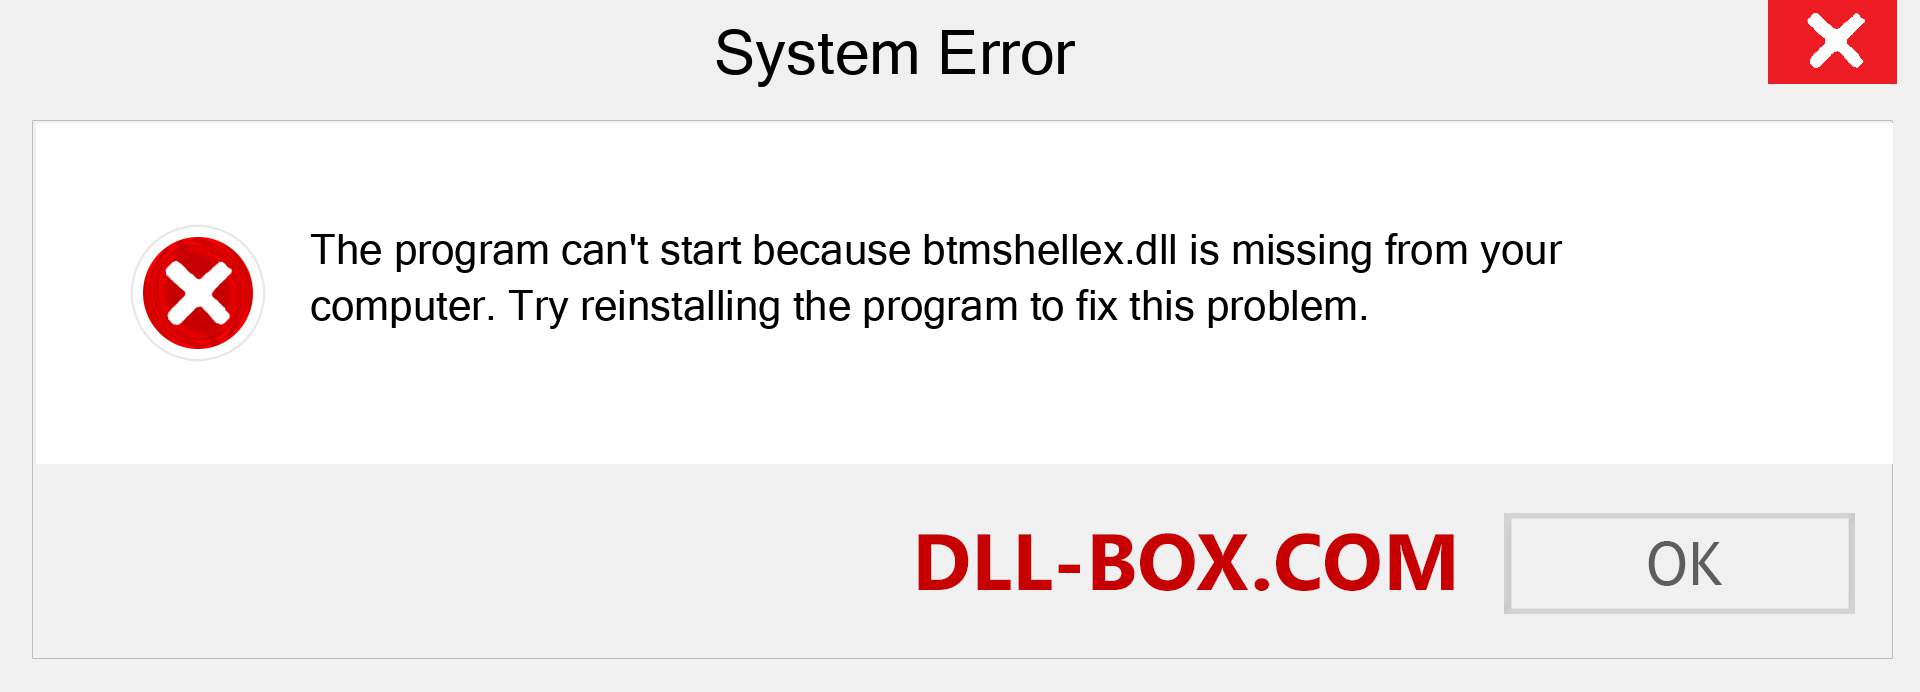  btmshellex.dll file is missing?. Download for Windows 7, 8, 10 - Fix  btmshellex dll Missing Error on Windows, photos, images